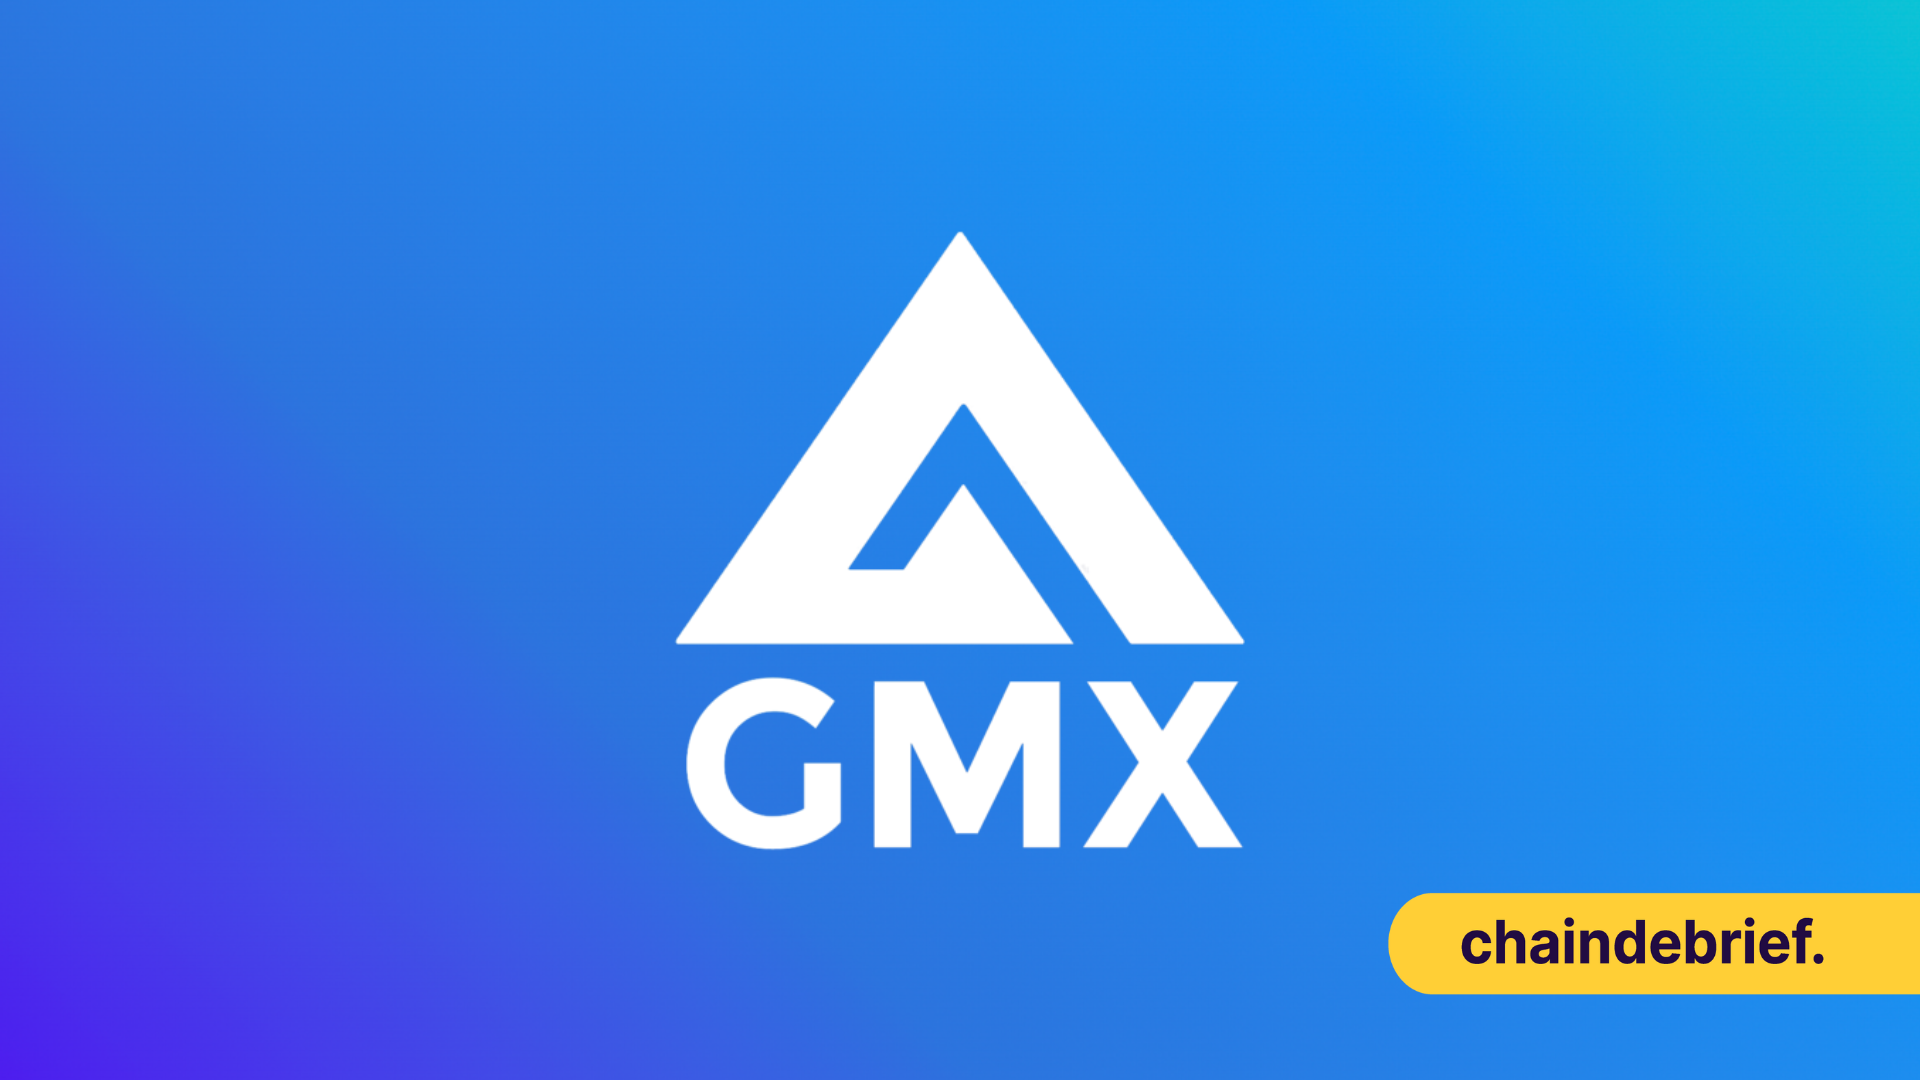 All You Need To Know About GMX – A Deep Dive Into The Next Crypto Derivatives Leader